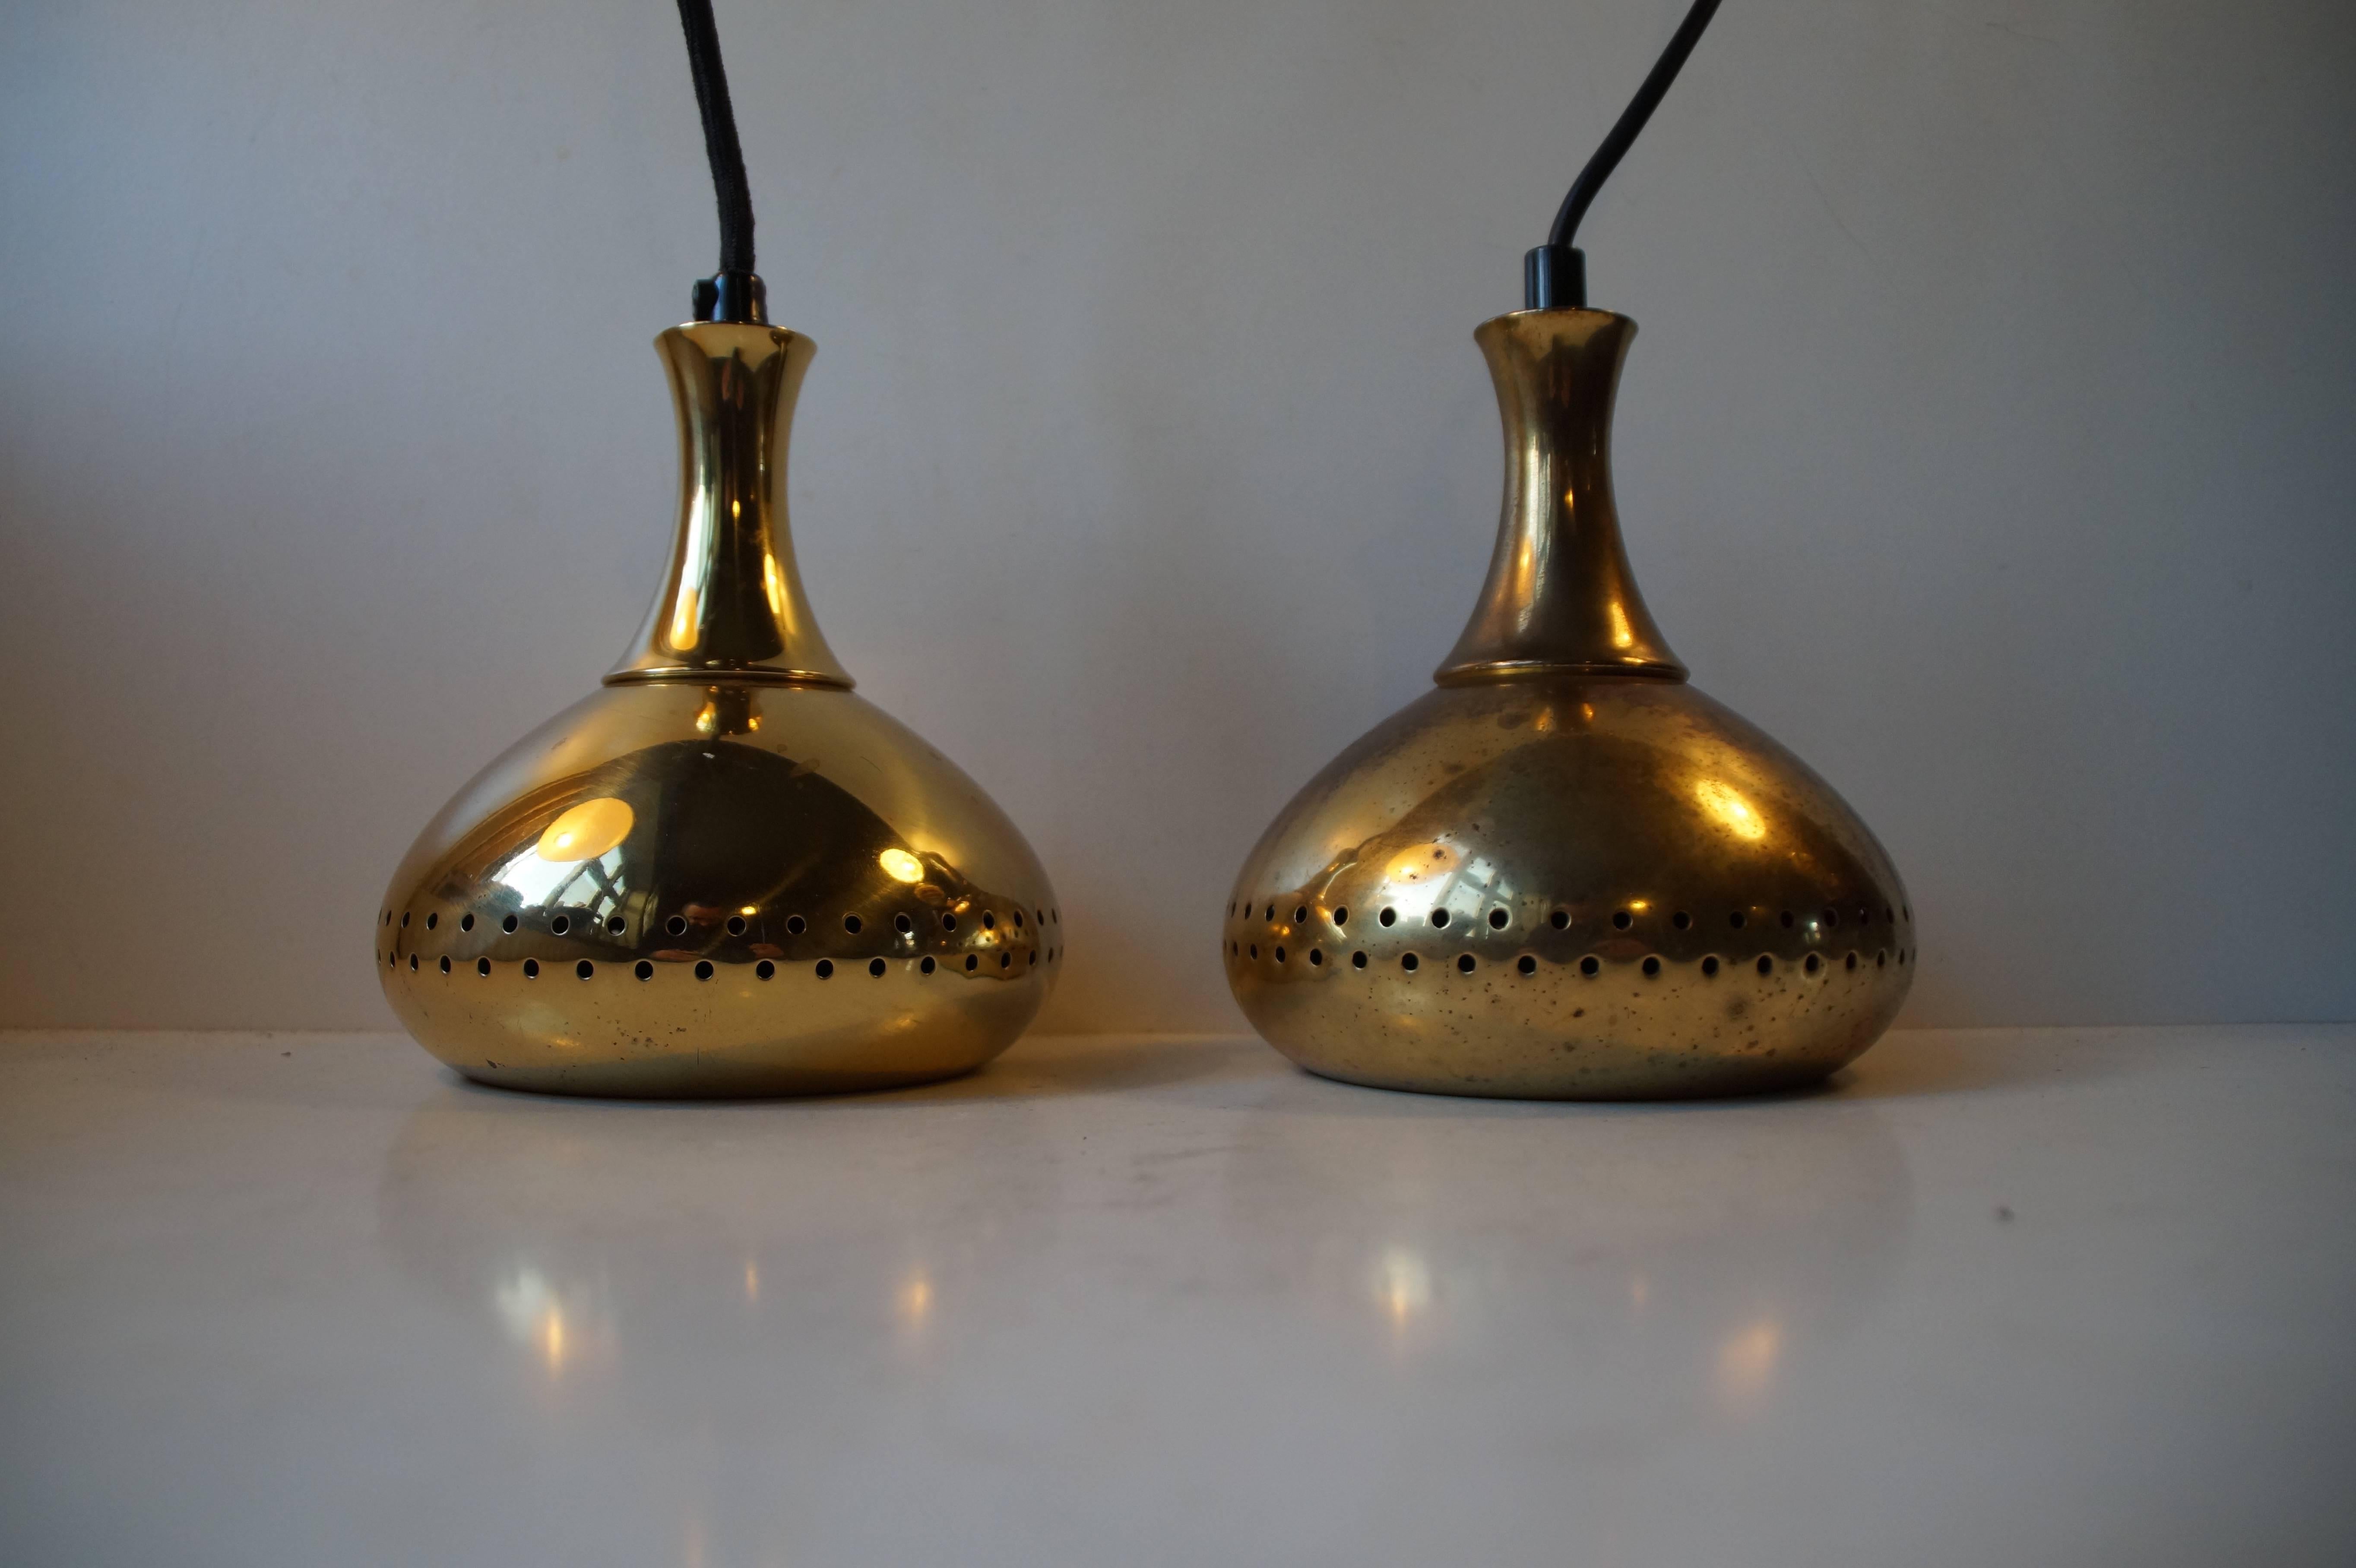 Patinated Pair of Small Brass Pendant Lamps by Hans-Agne Jakobsson for Markaryd AB